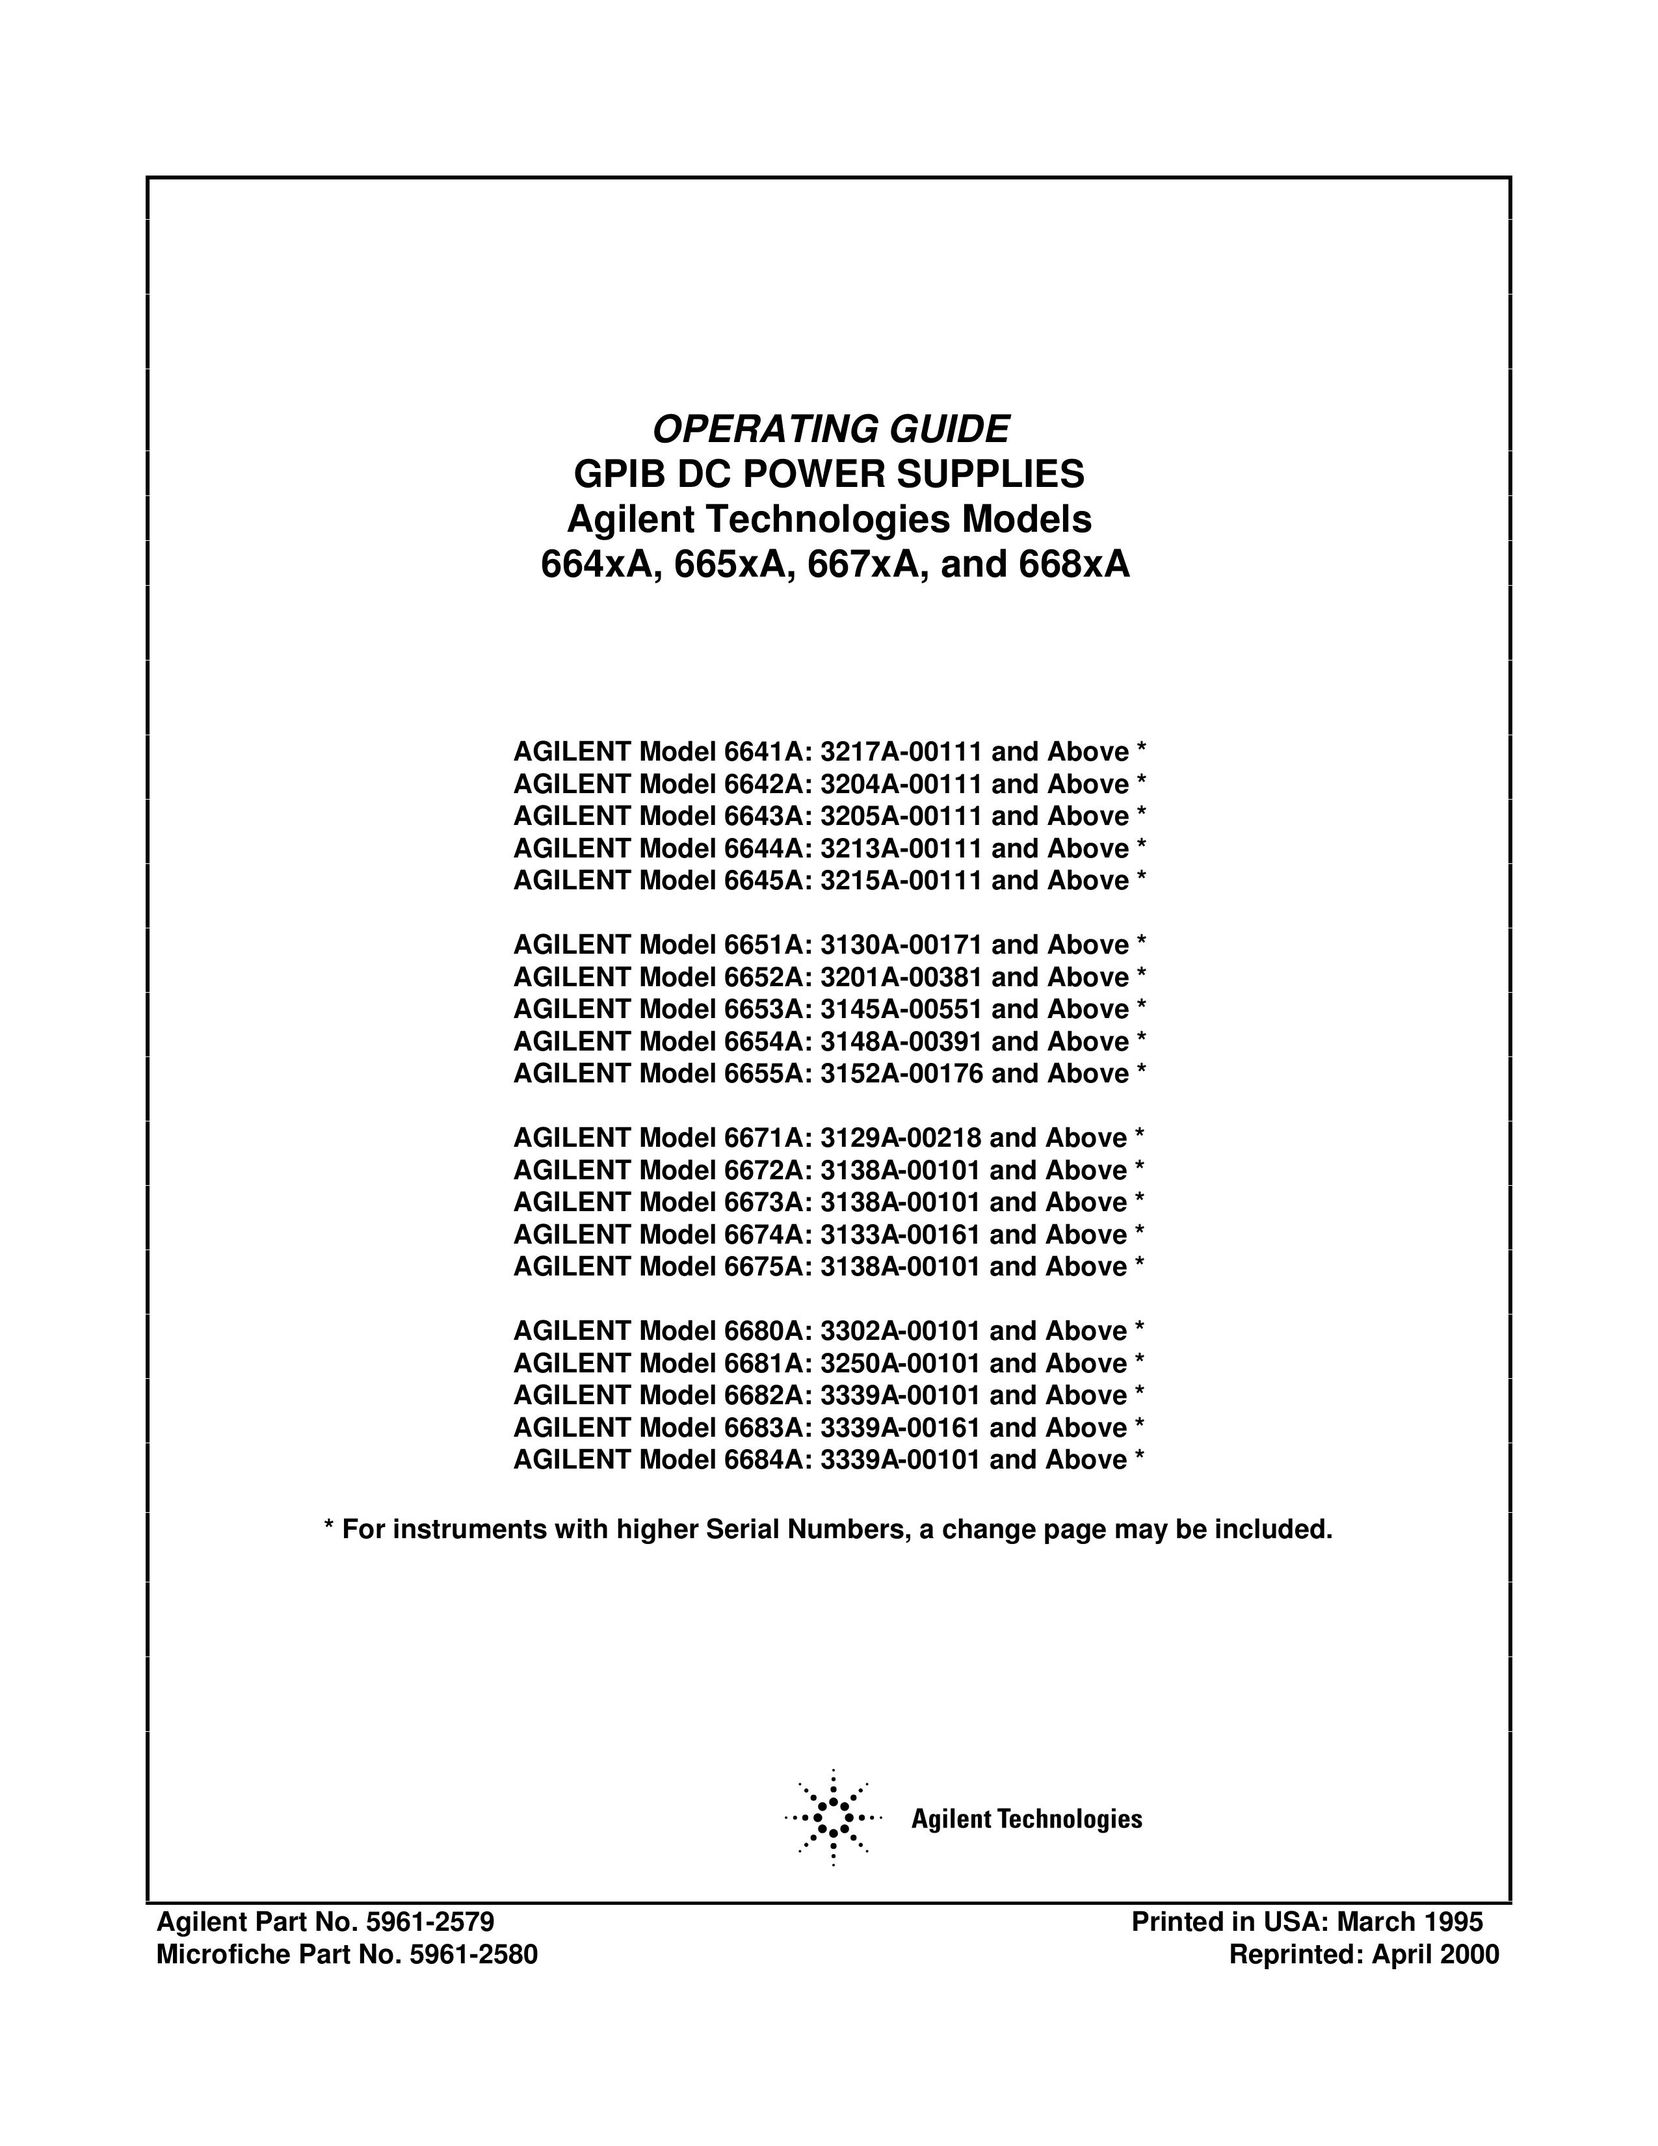 Agilent Technologies Model 6652A: 3201A-00381 Video Gaming Accessories User Manual (Page 1)